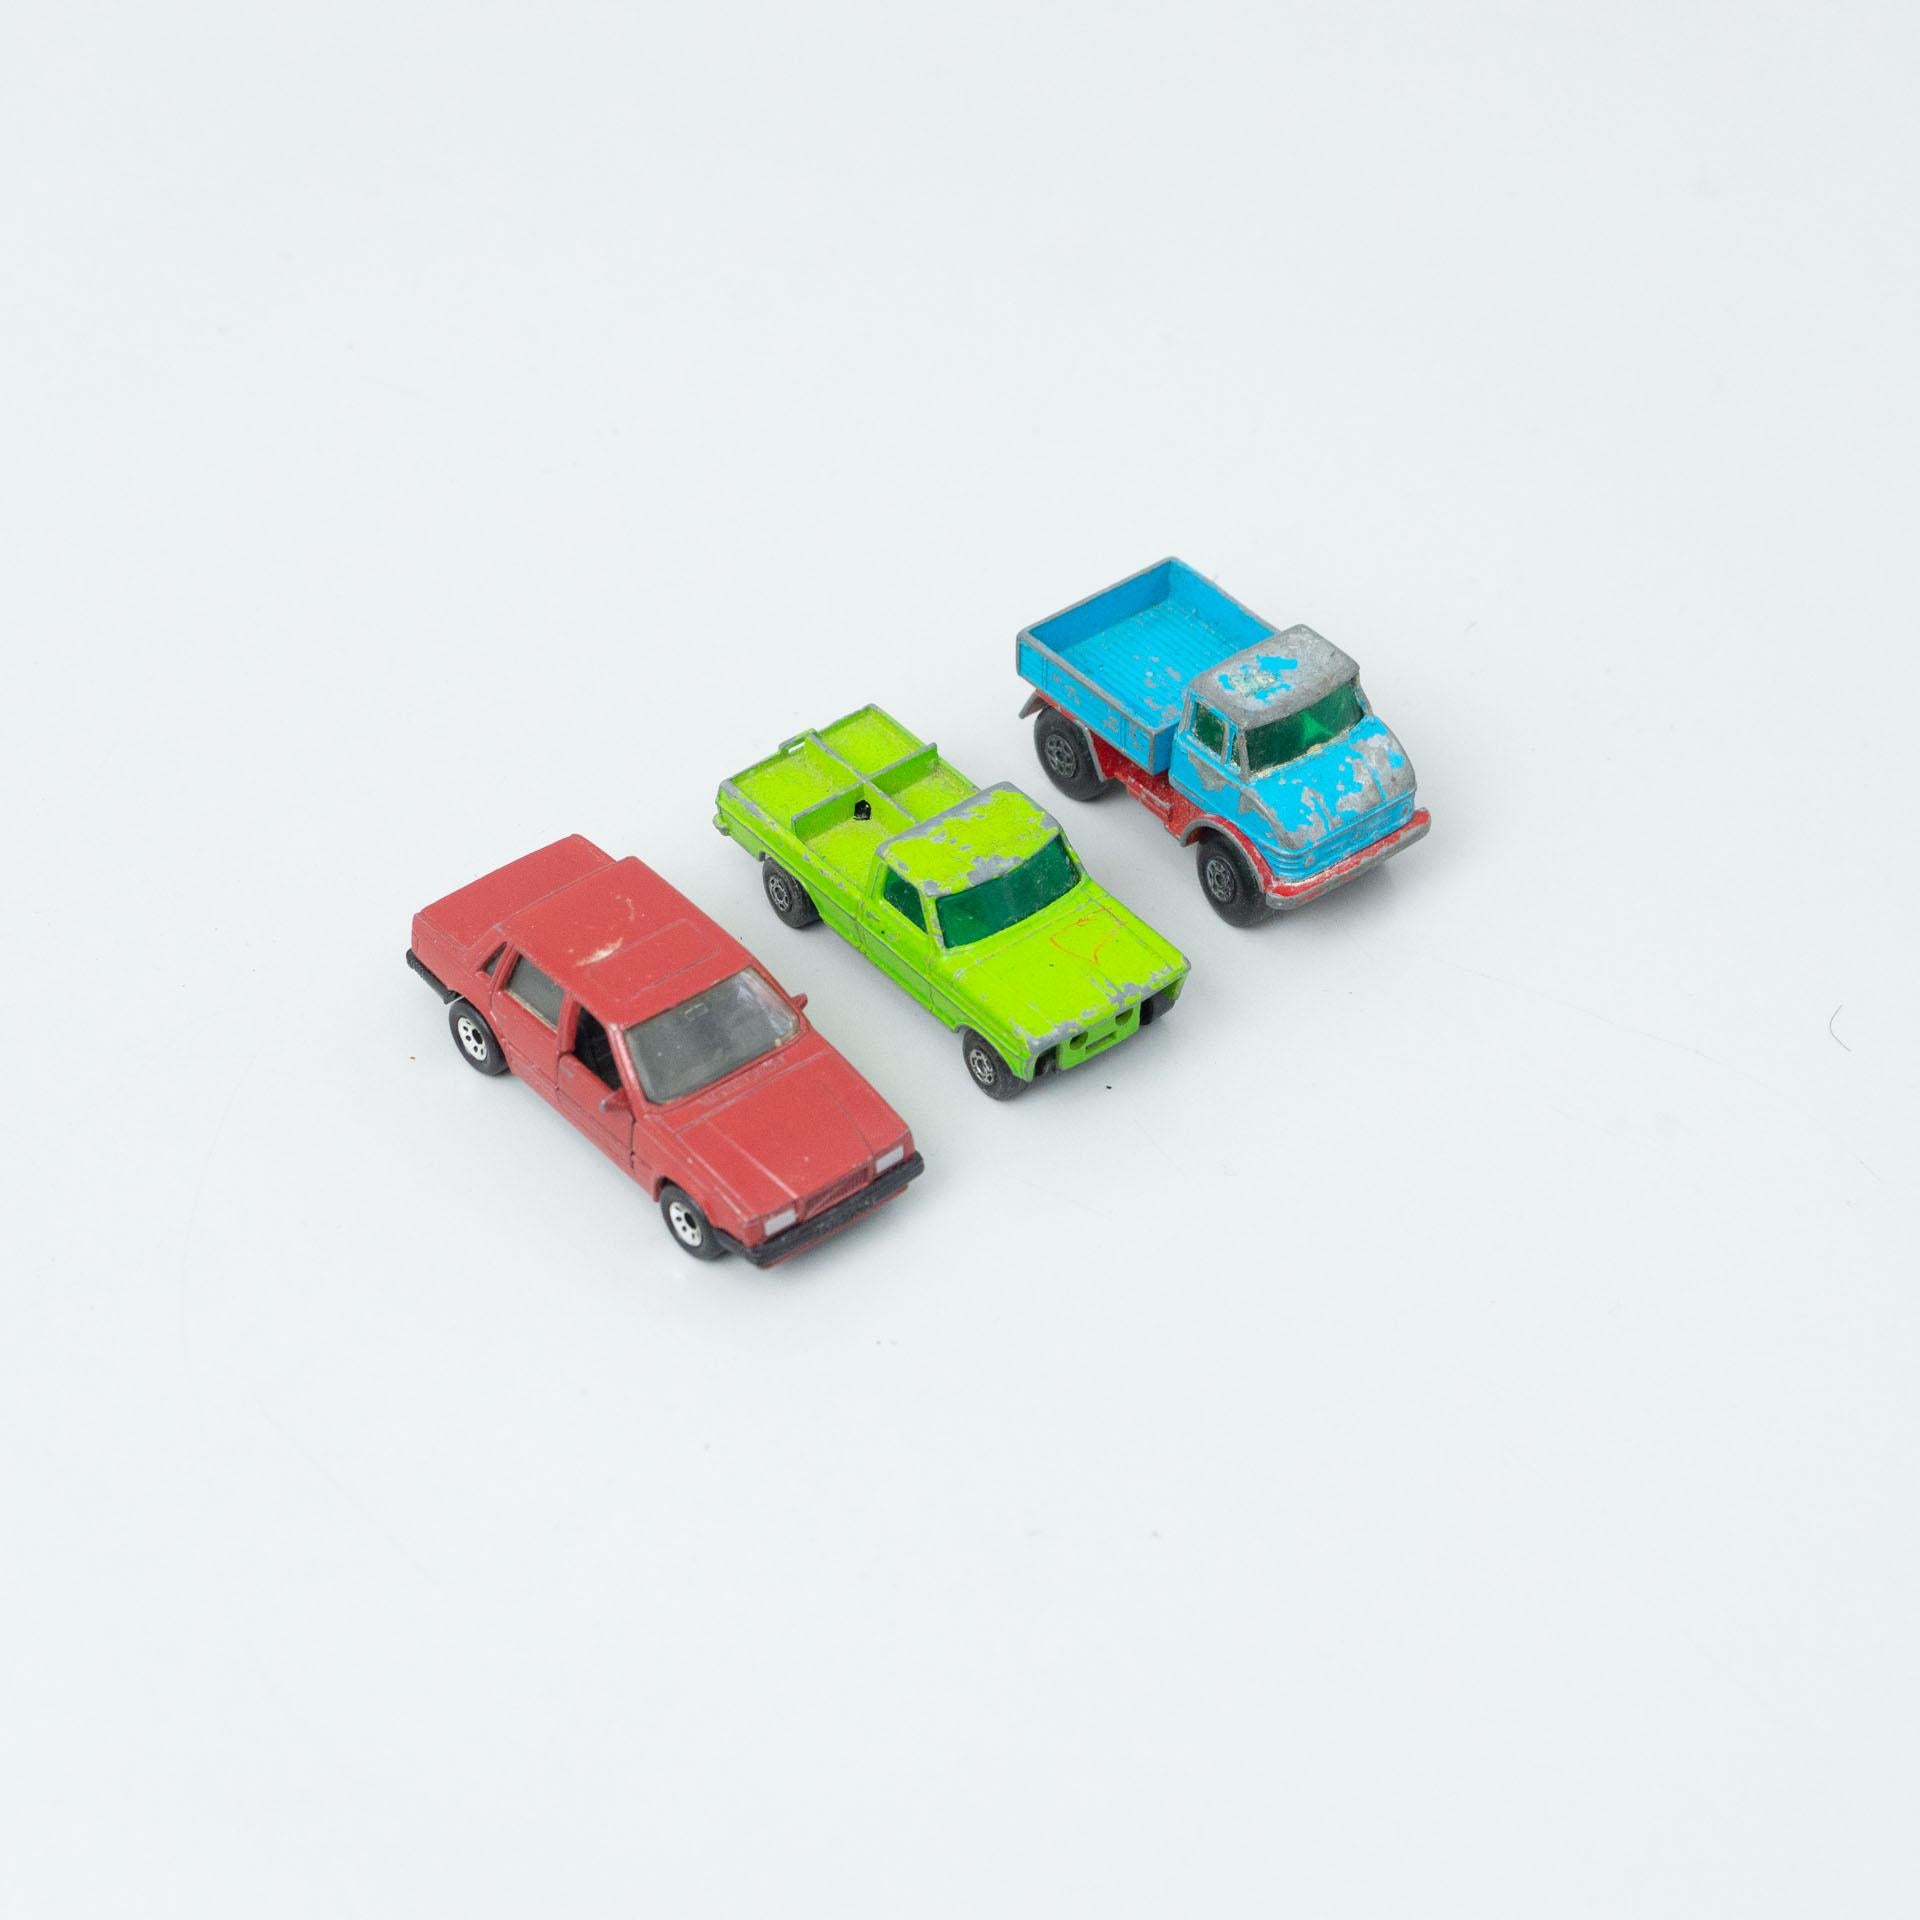 1960s matchbox cars for sale